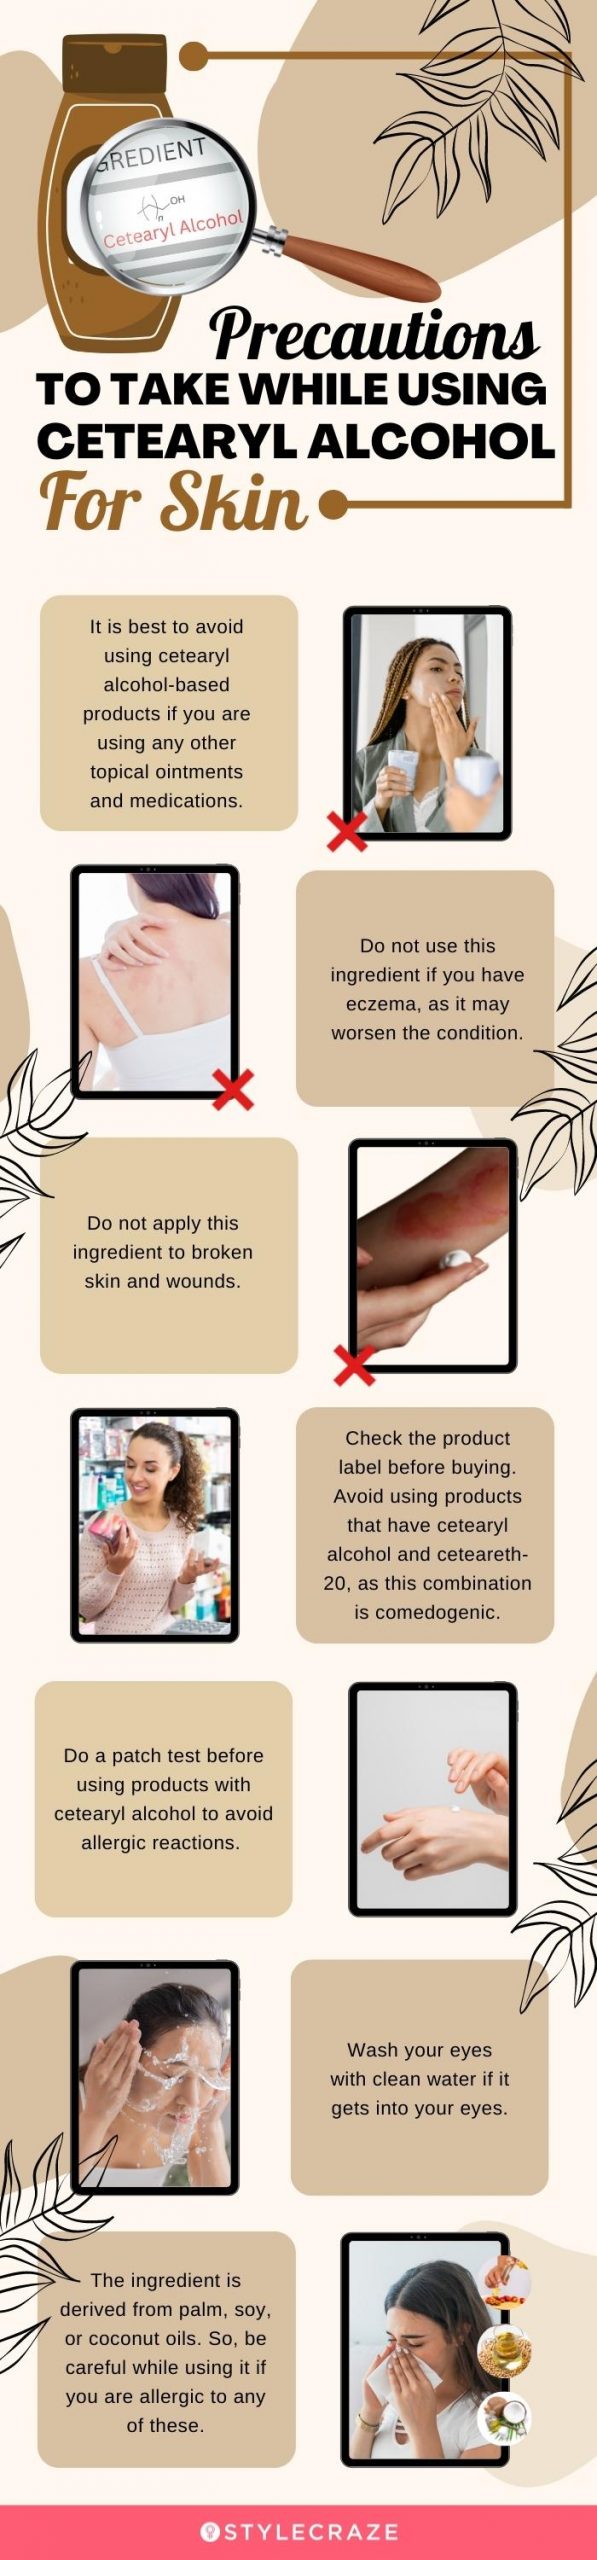 precautions to take while using cetearyl alcohol for skin (infographic)